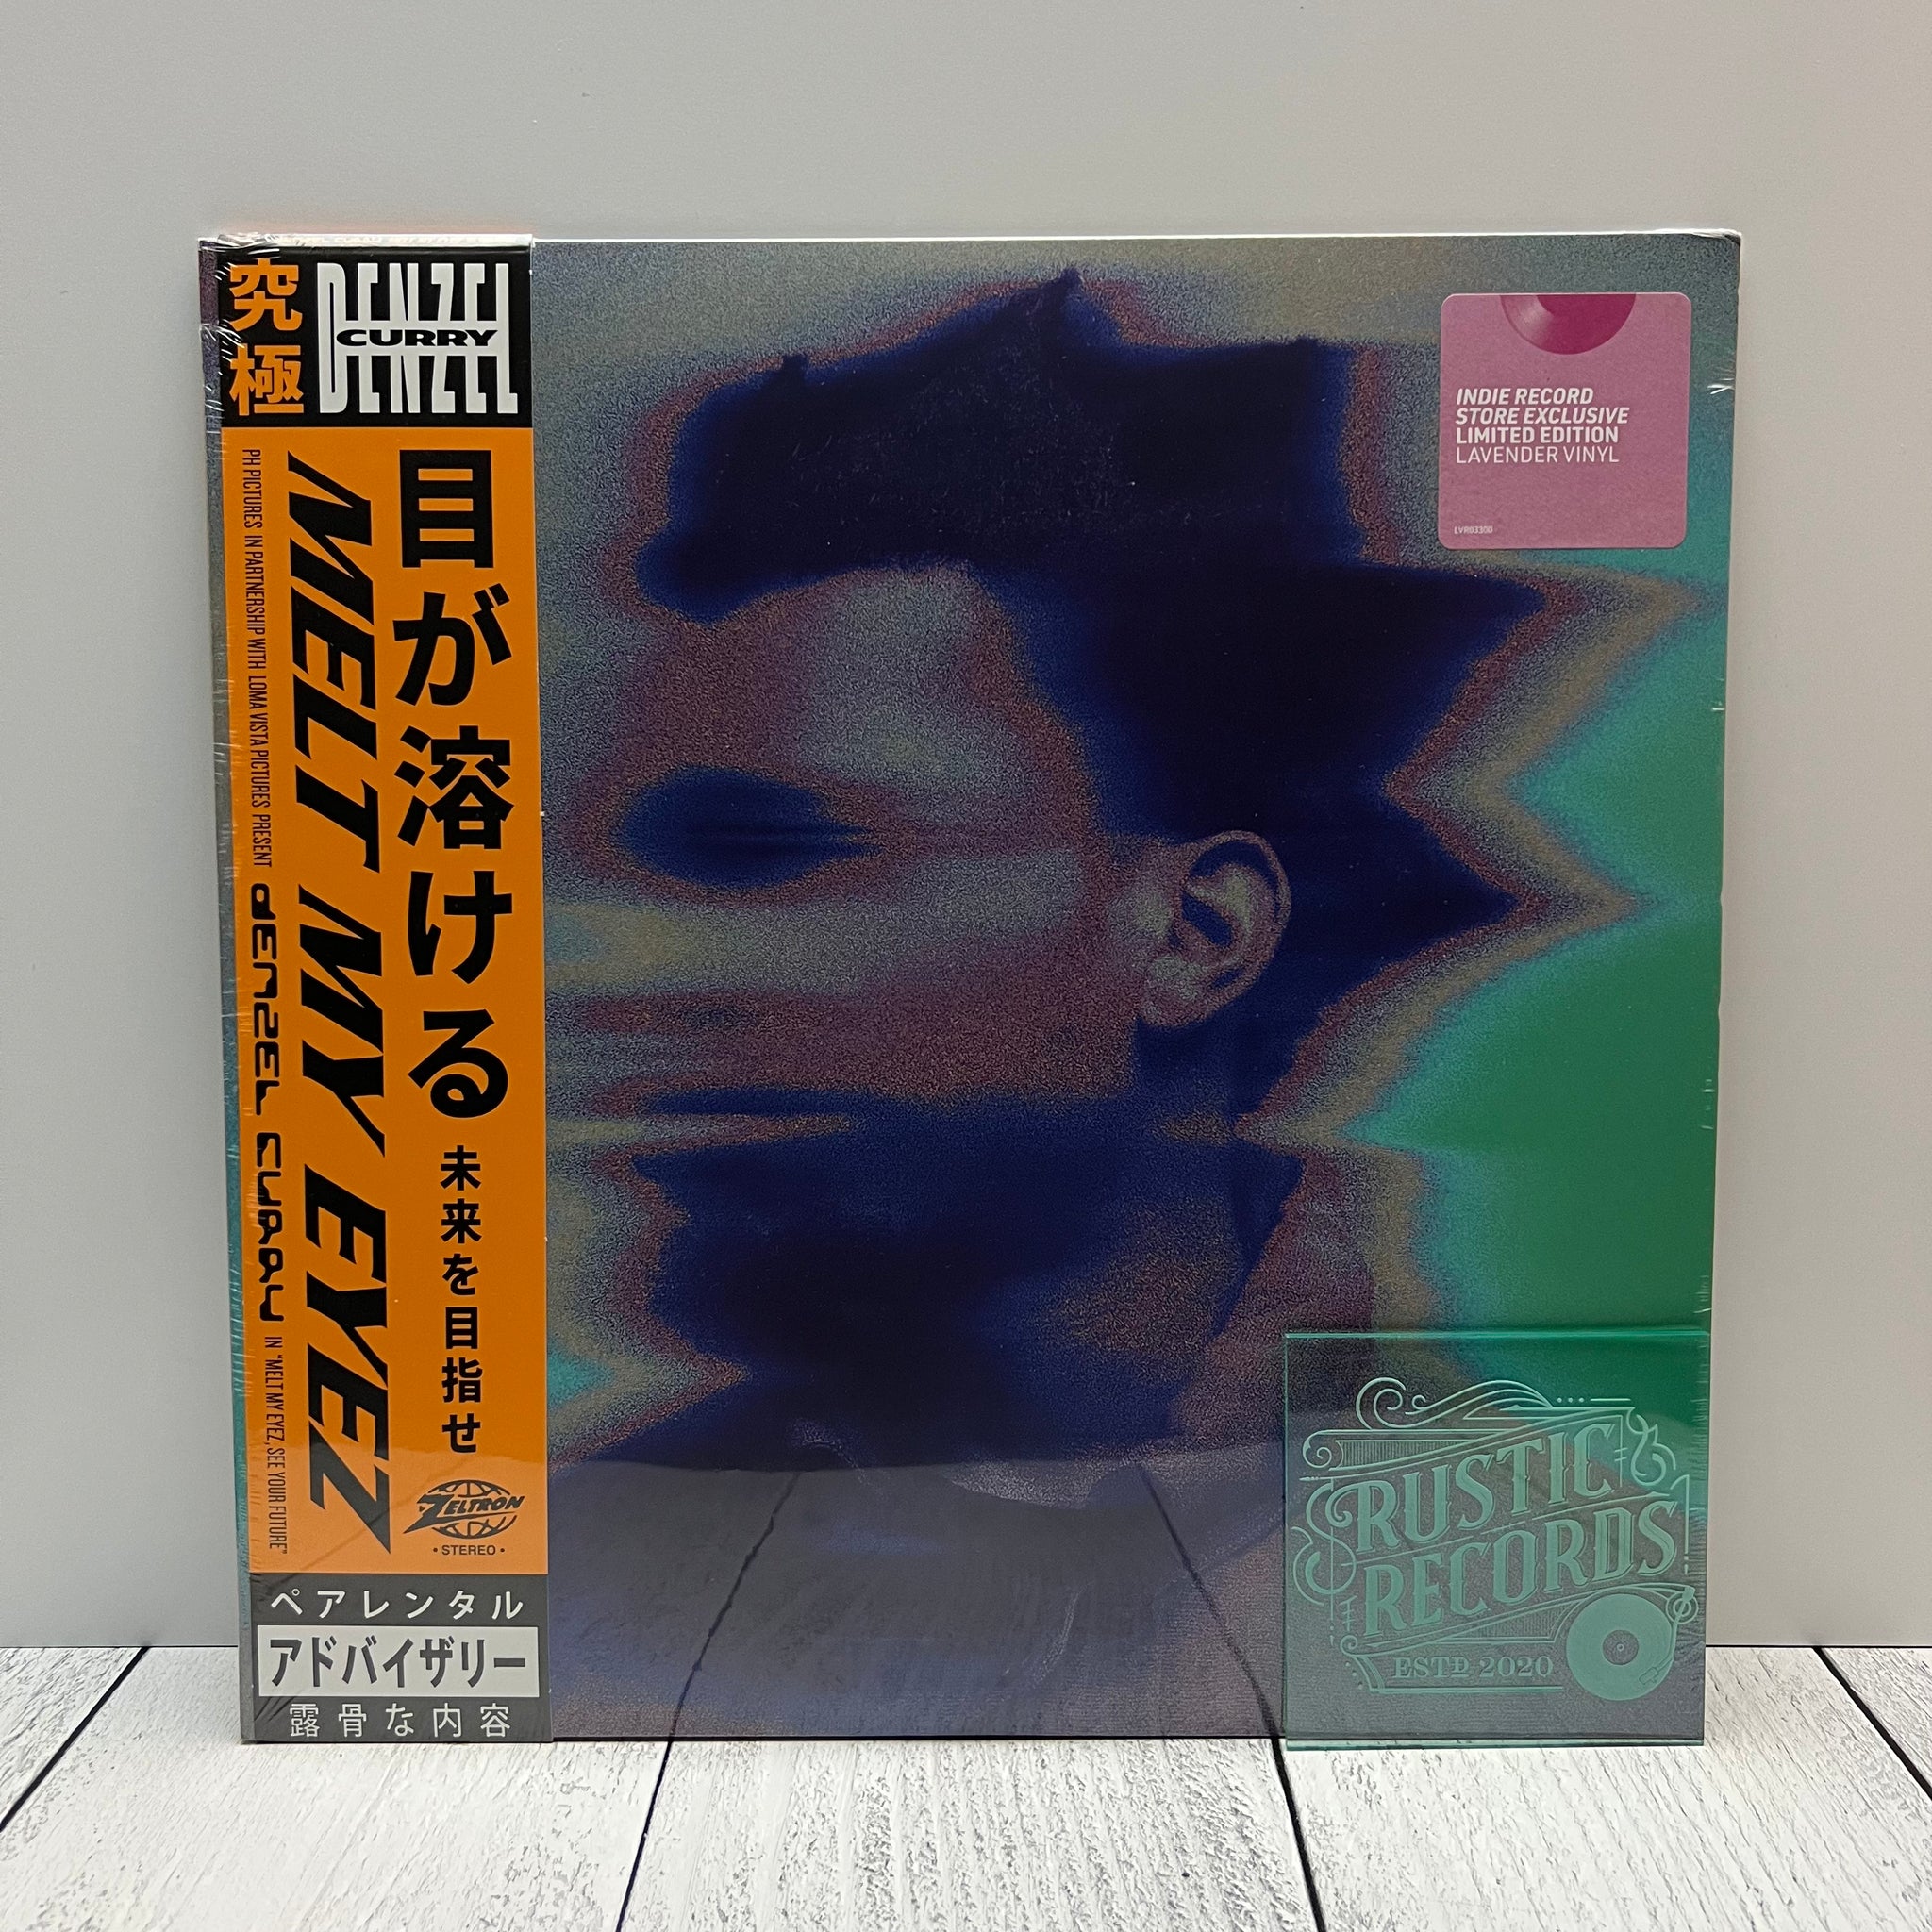 Denzel Curry - Melt My Eyez, See Your Future (Indie Exclusive Lavender Vinyl)